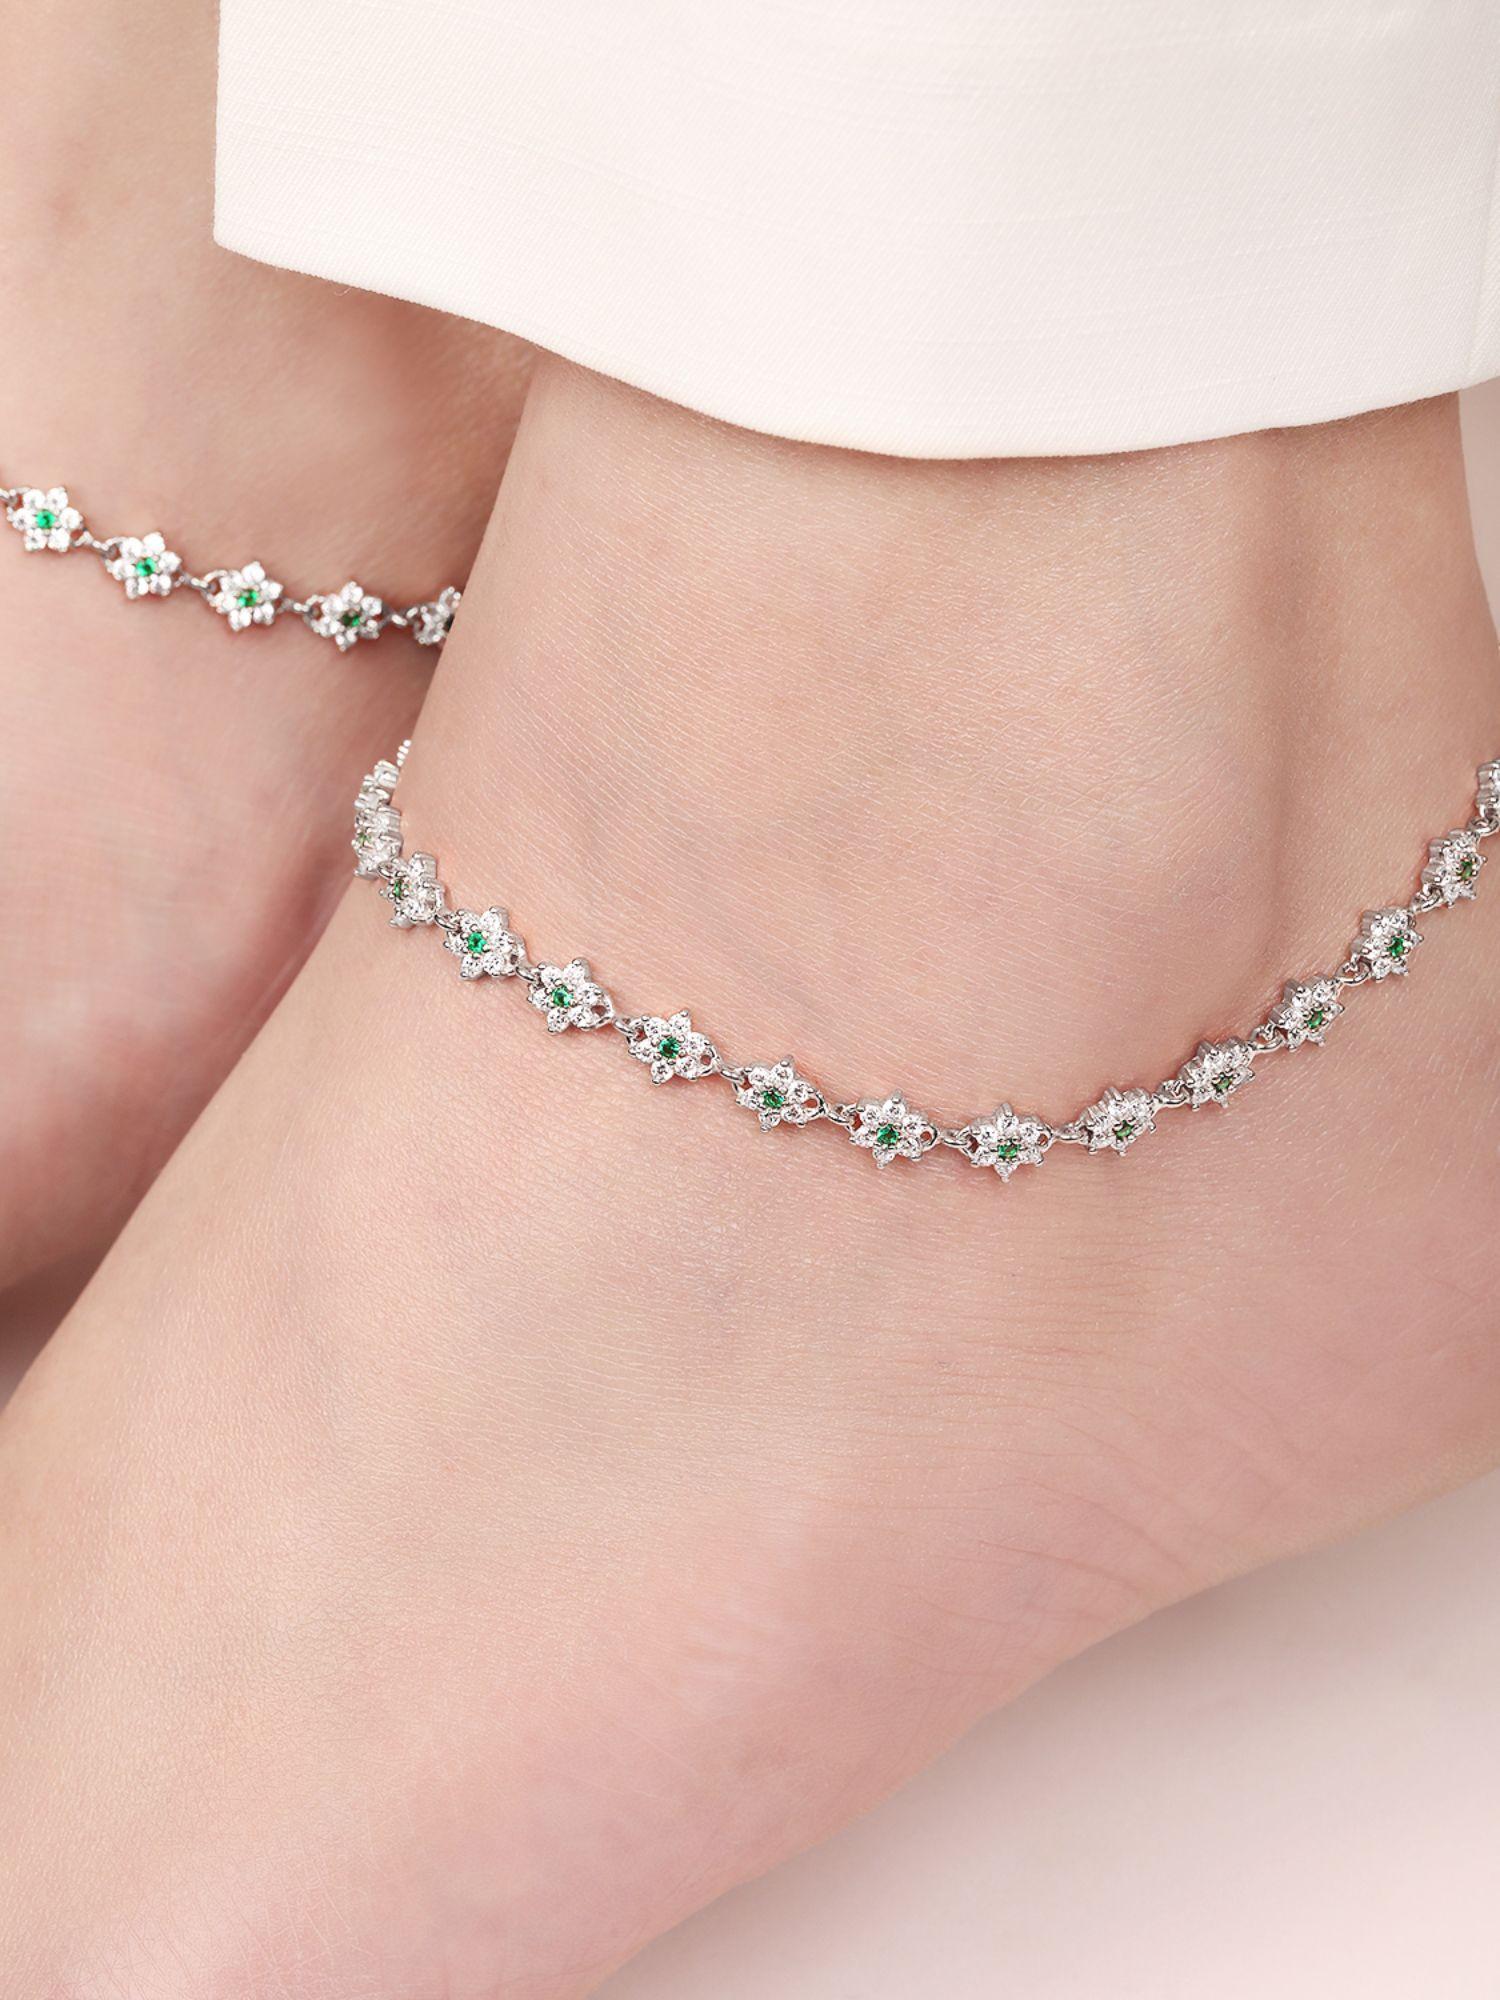 blooms of elegance rose gold-plated 925 sterling silver anklet- pair